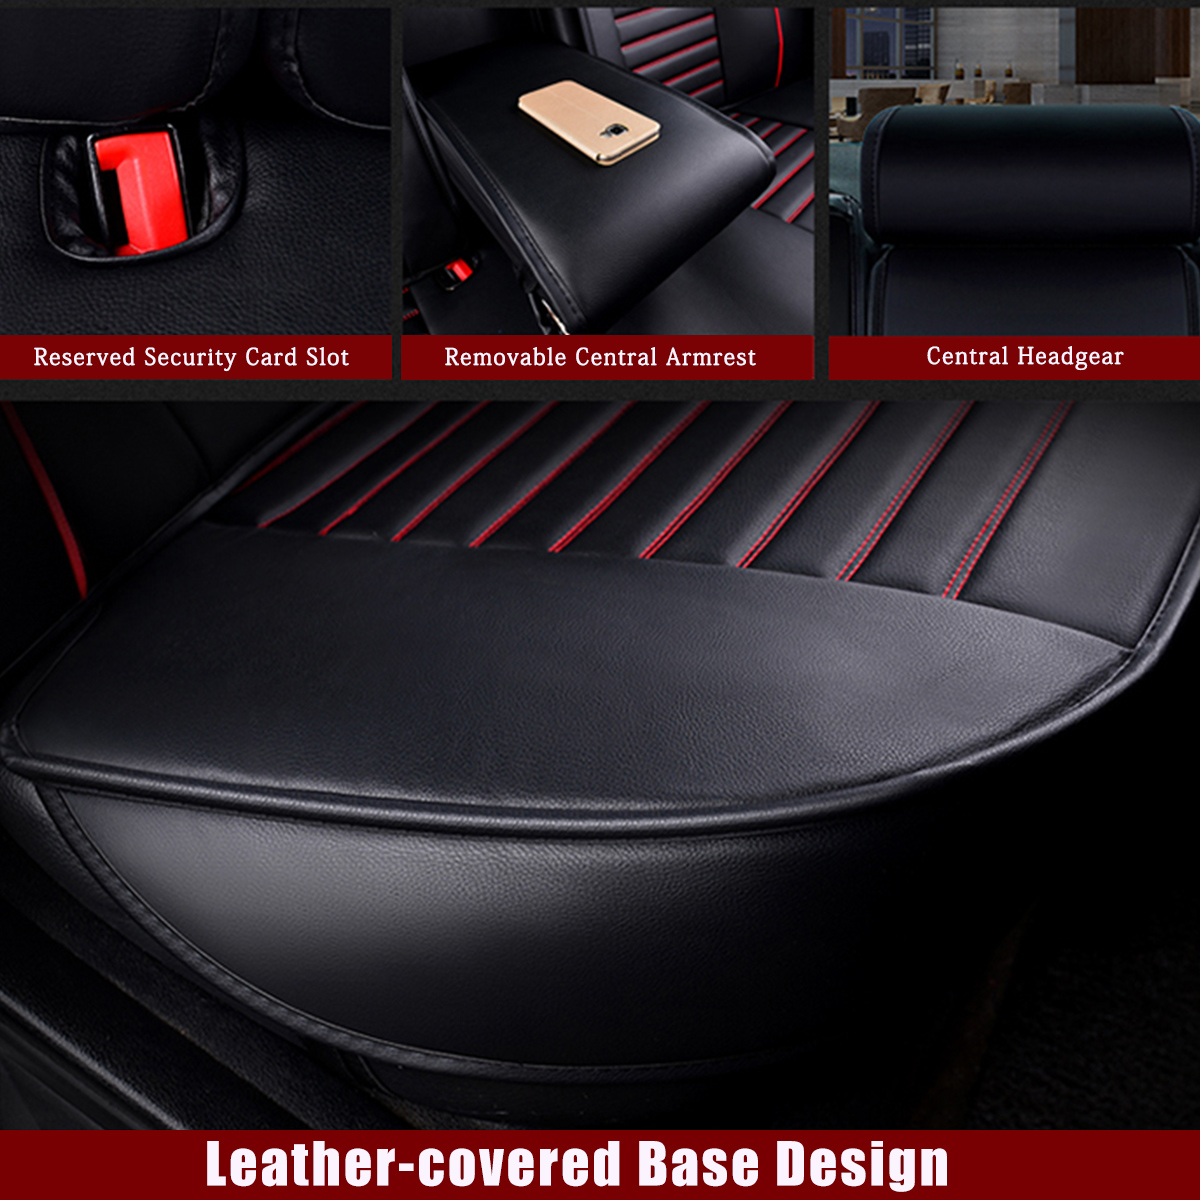 Universal-Wear-Resistant-Front--Rear-PU-Leather-Semi-Enclosed-Car-Seat-Cover-Set-1823458-3